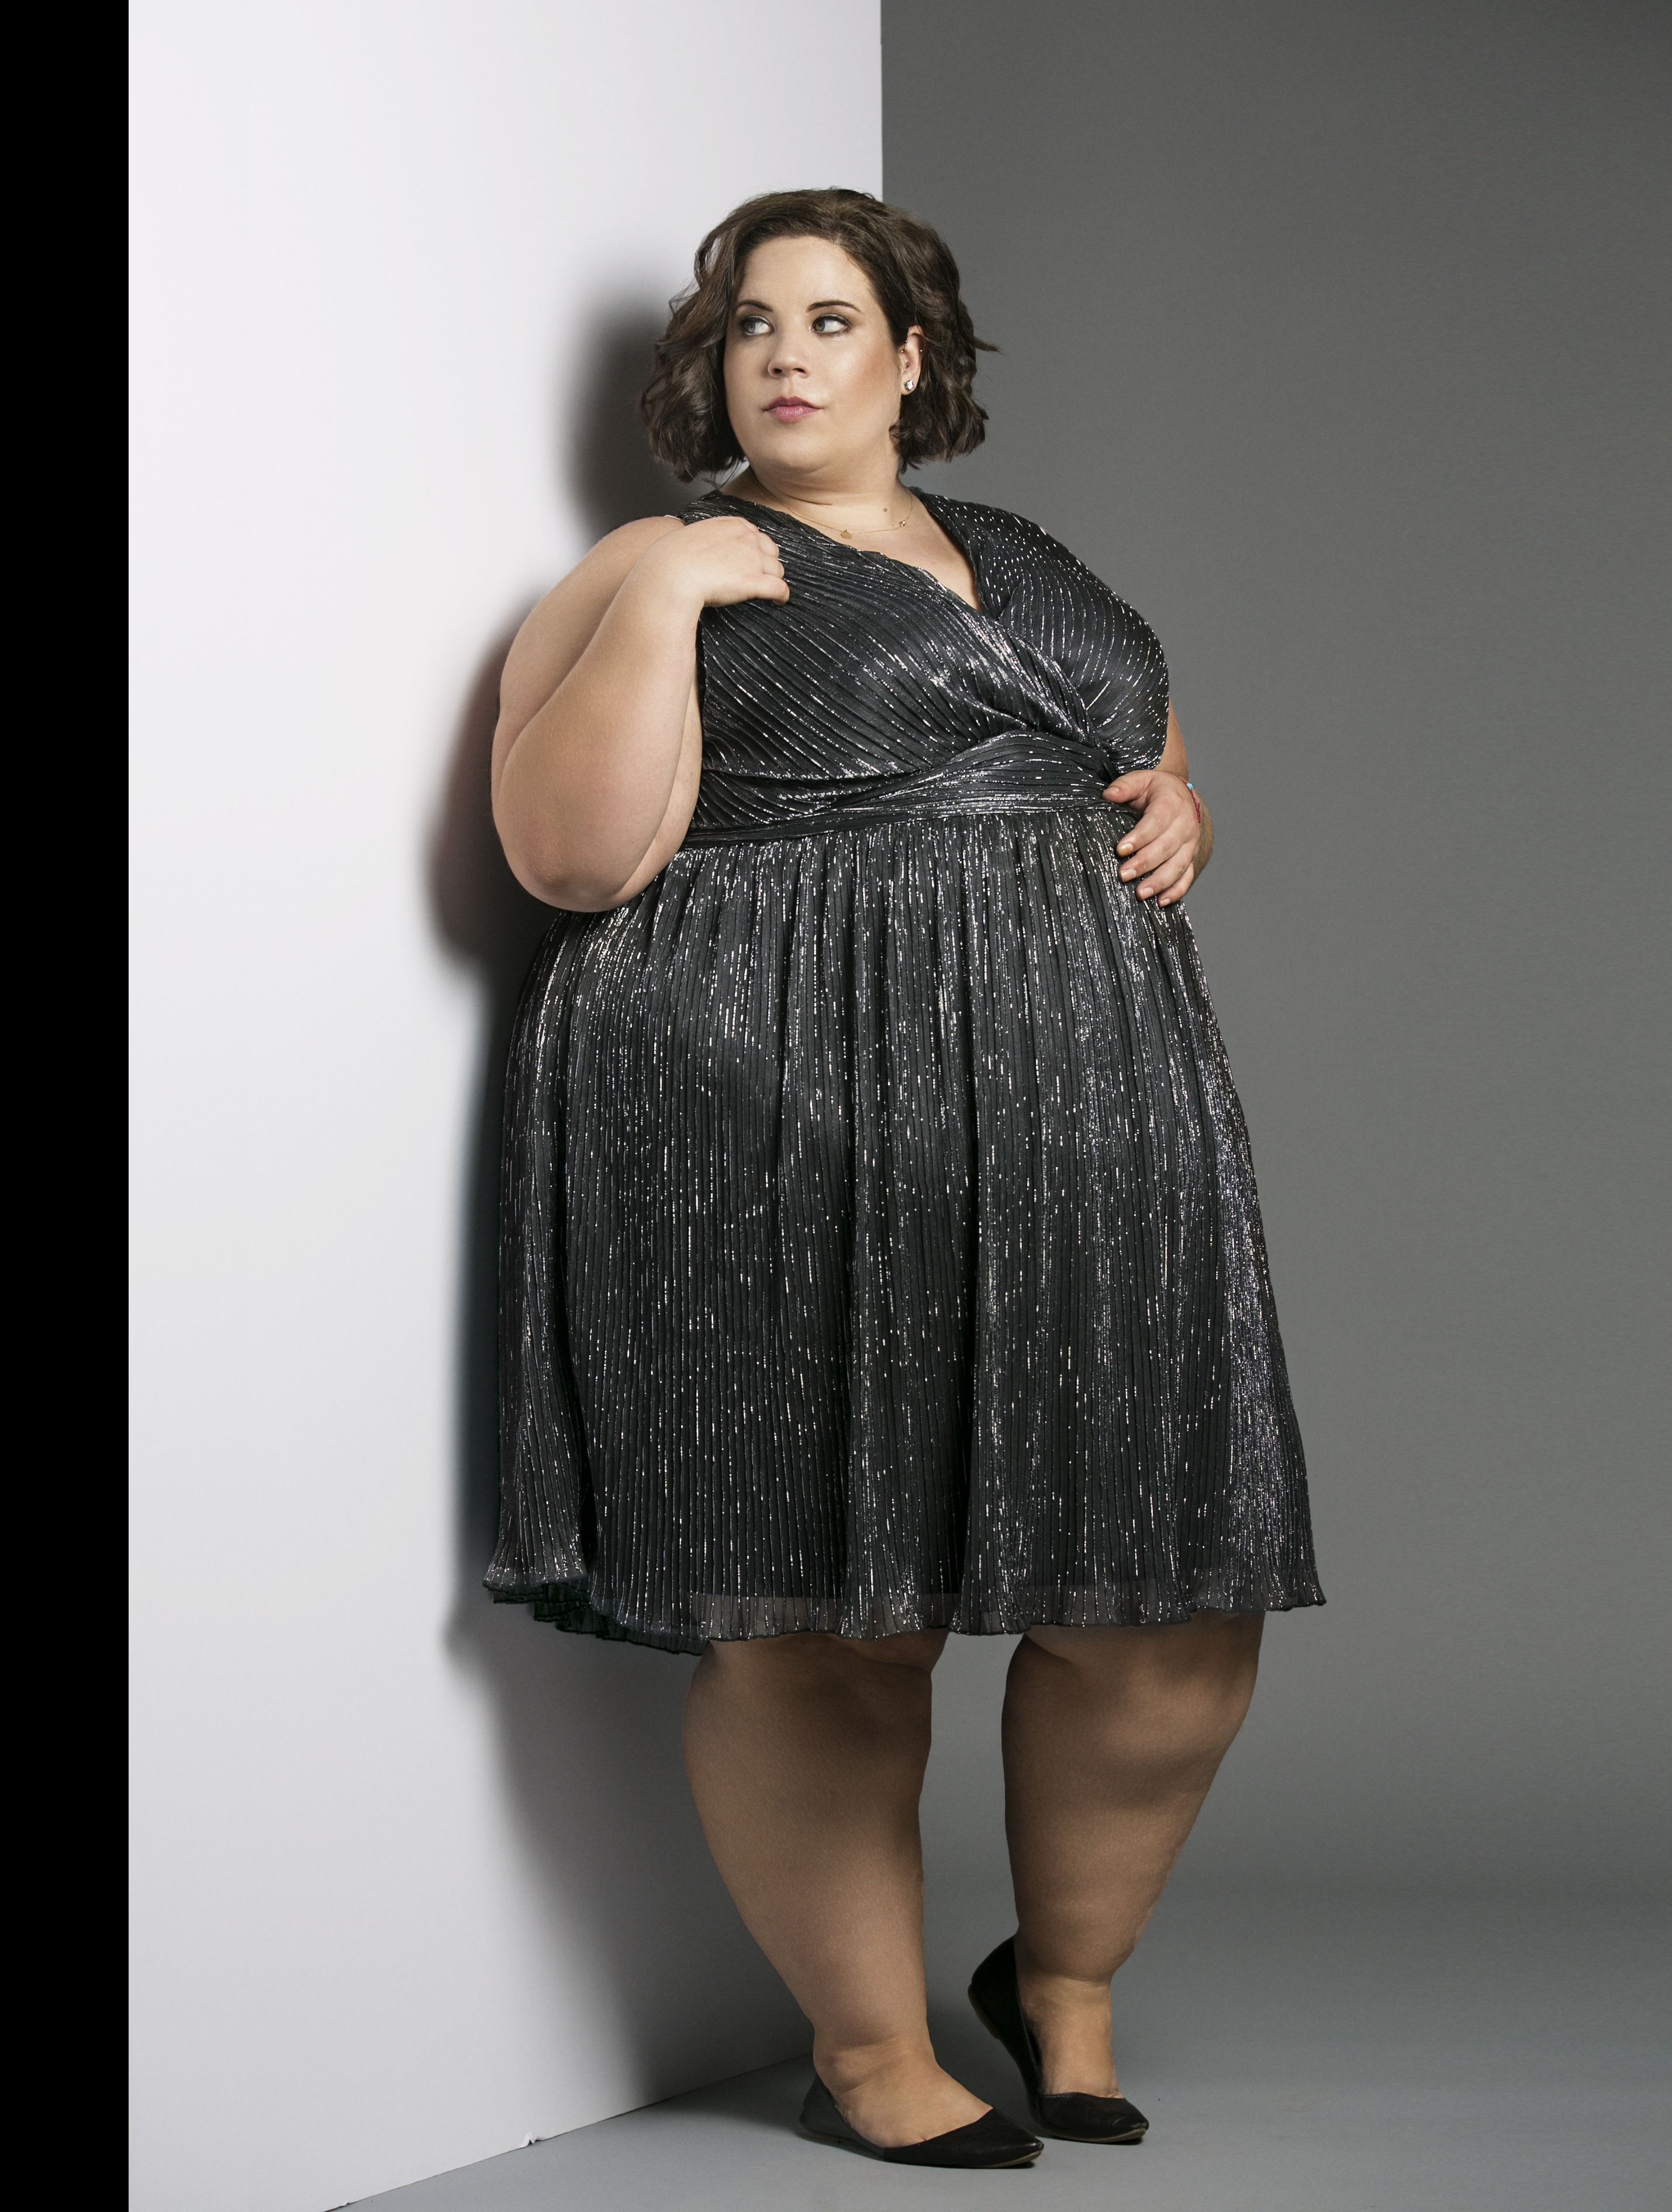 New Magazine FabUplus to 'Show Plus Size Women That They're Valued